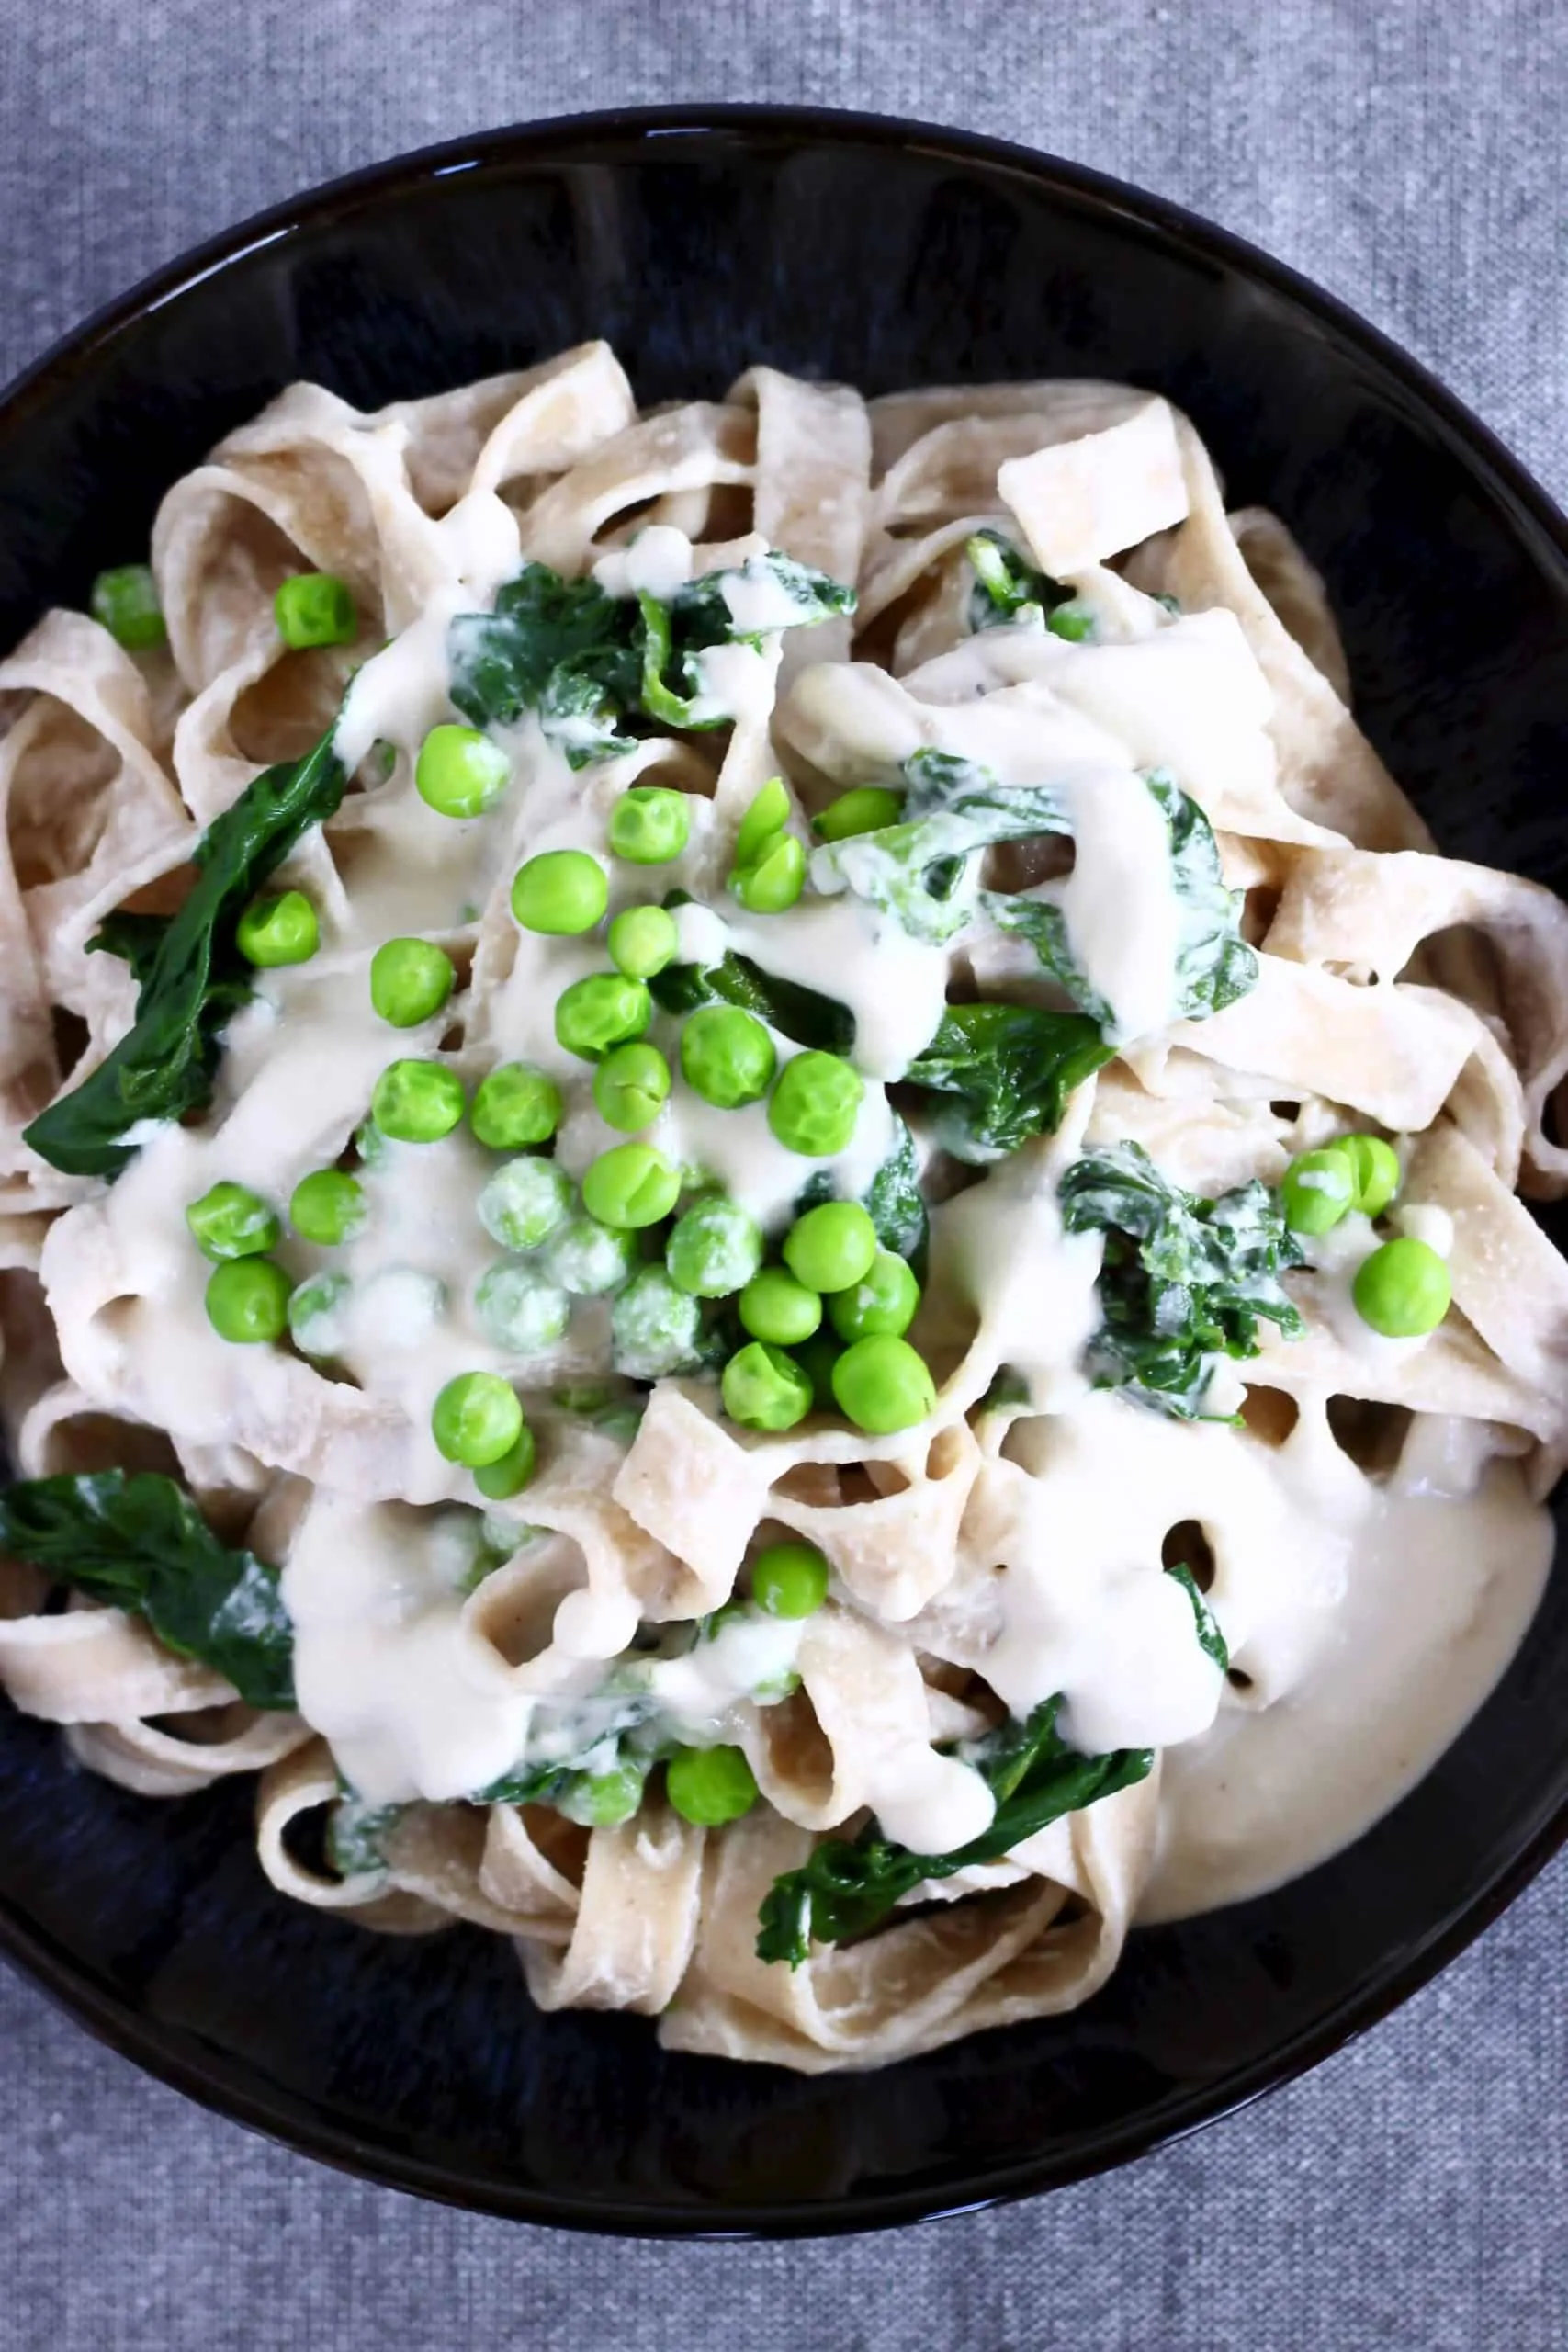 Cashew alfredo sauce pasta with green peas in a black bowl